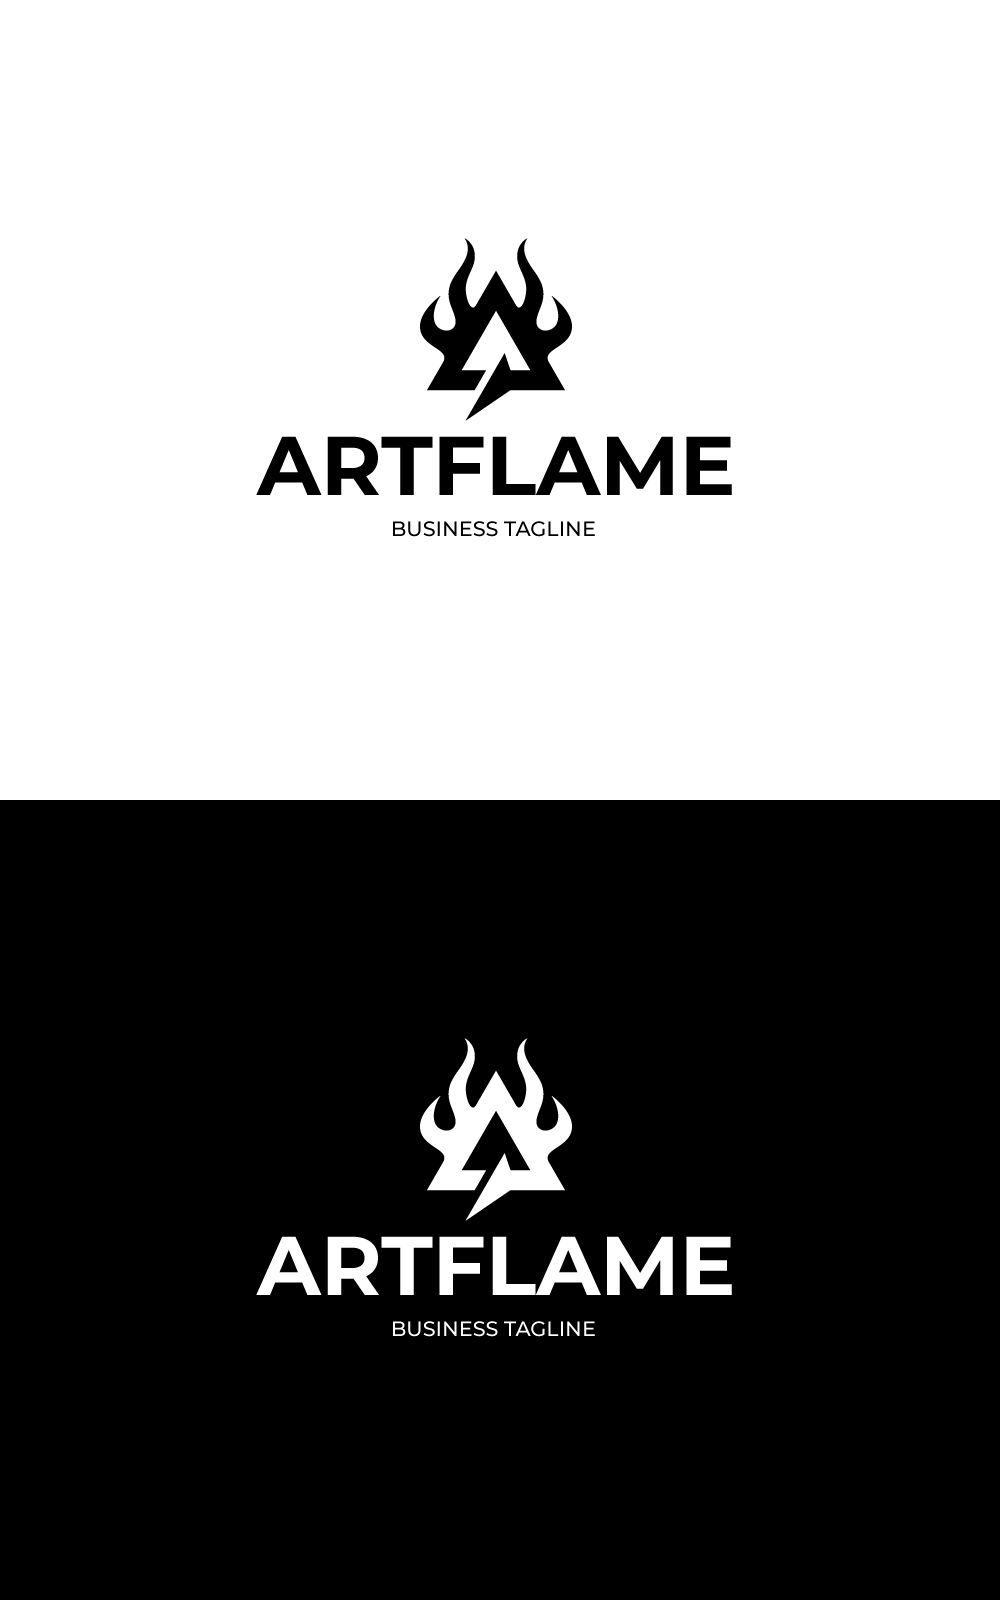 Art Flame - Letter A Logo Template by Ardies | Codester